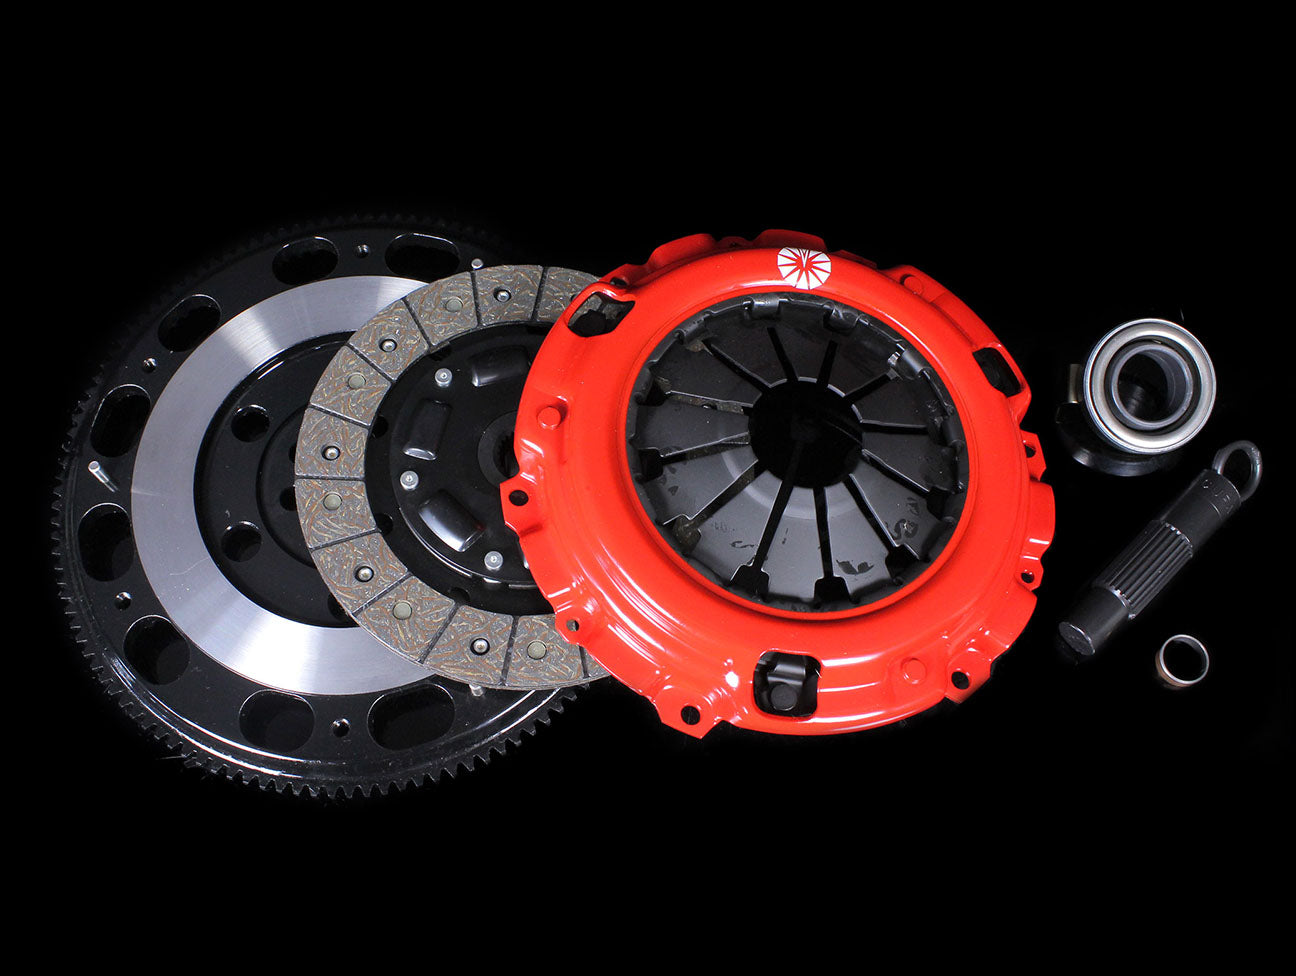 Action Clutch Stage 1 1OS Clutch Kit - D-Series